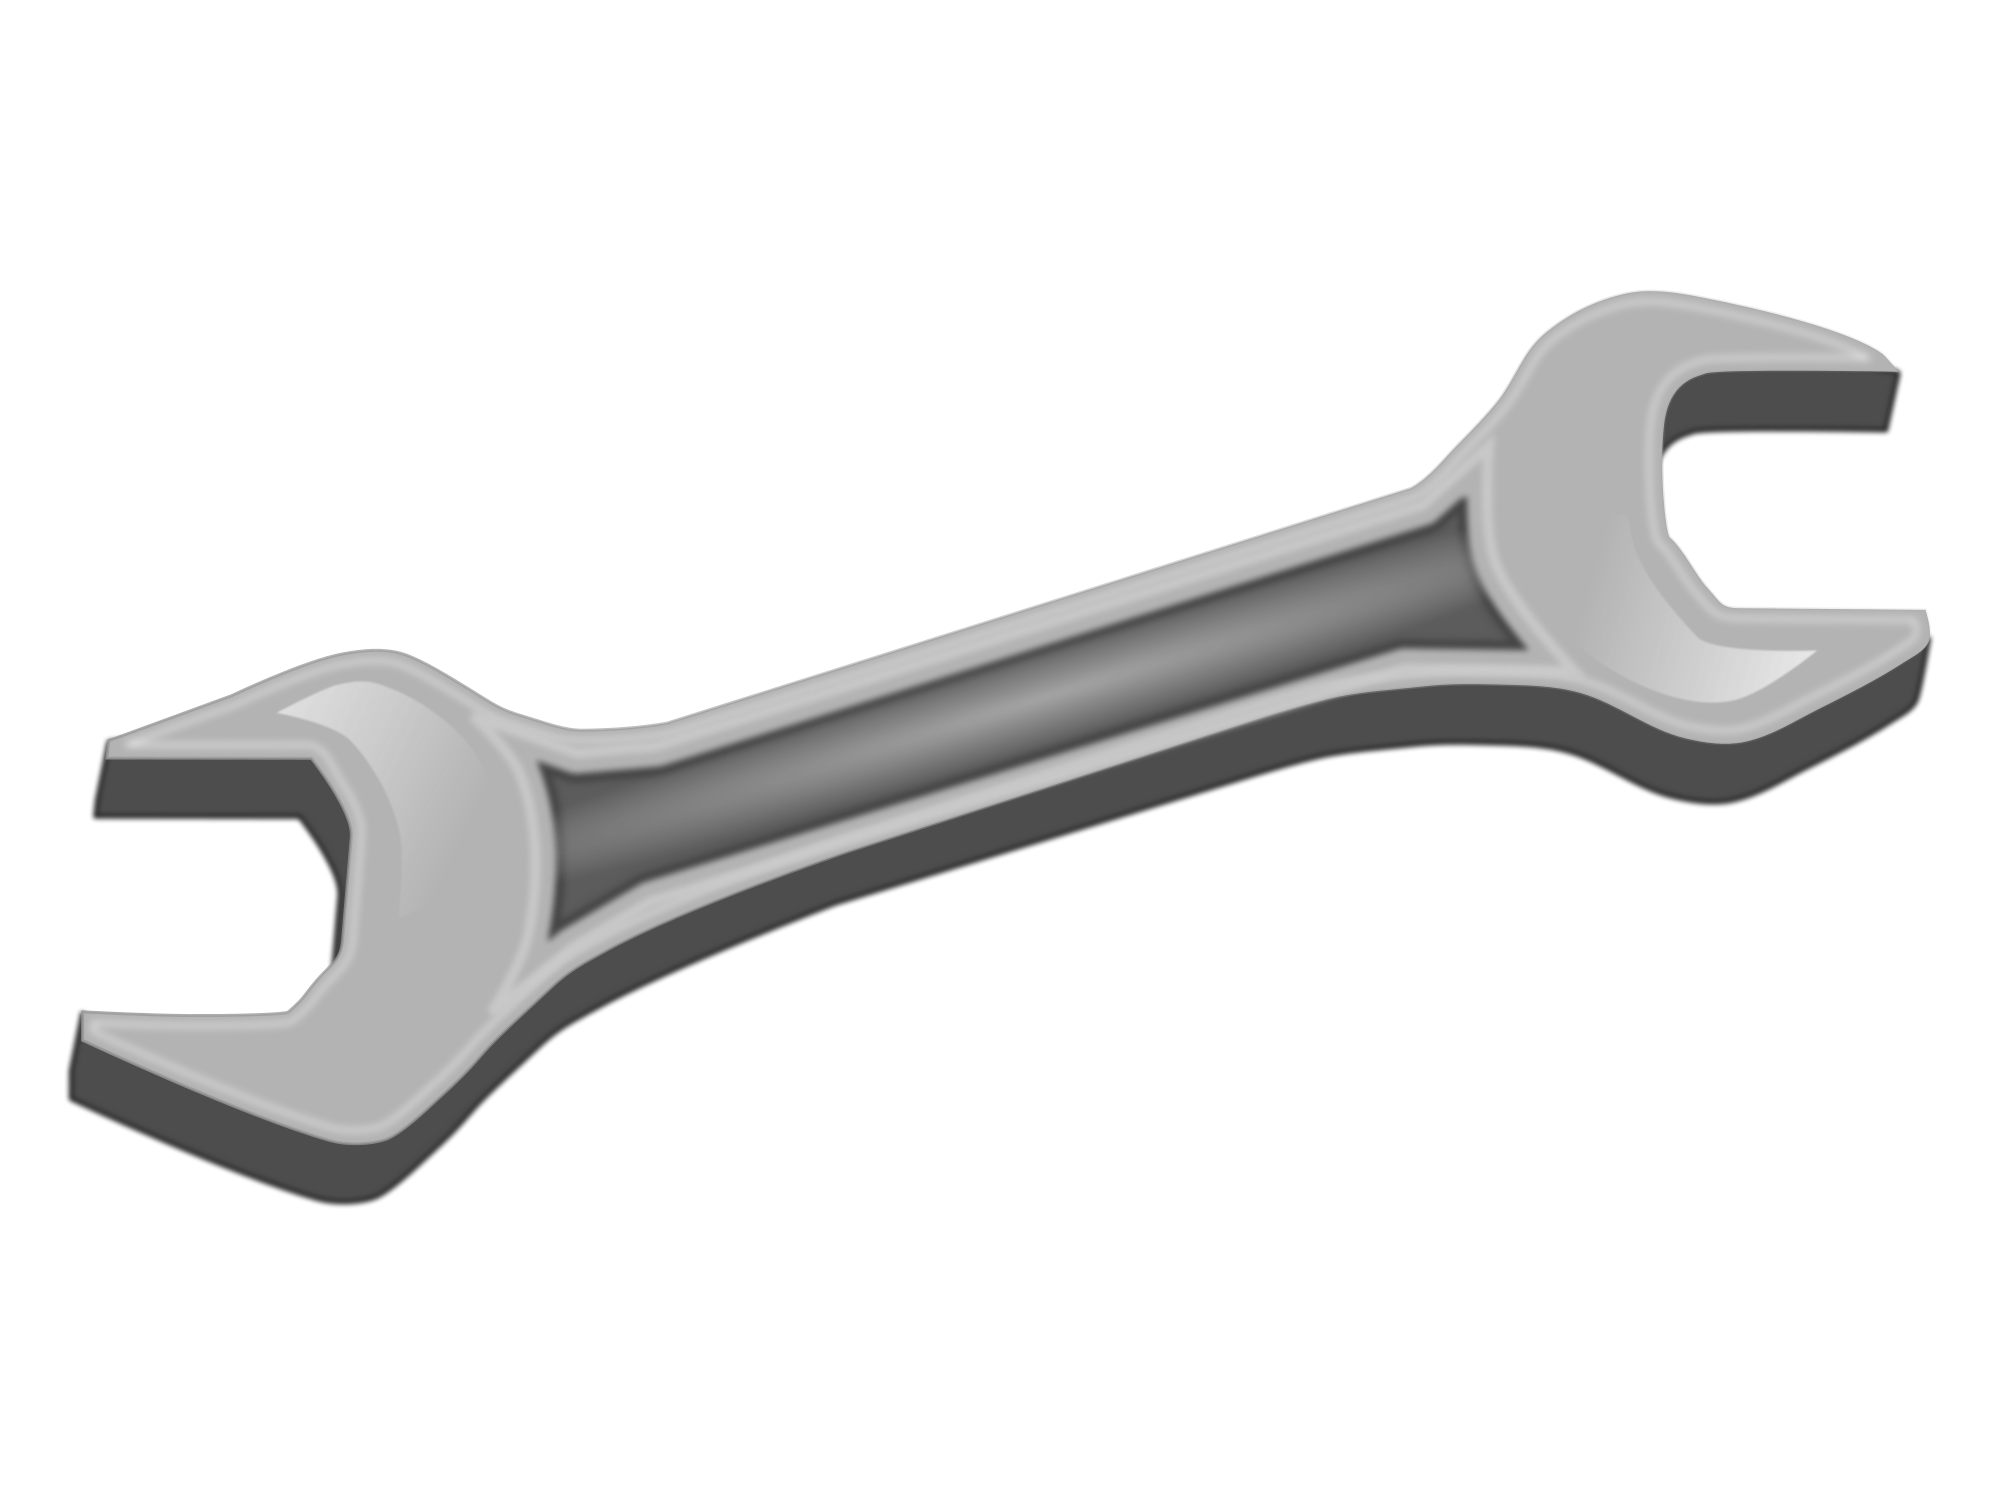 Wrench PNG HD and HQ Image pngteam.com